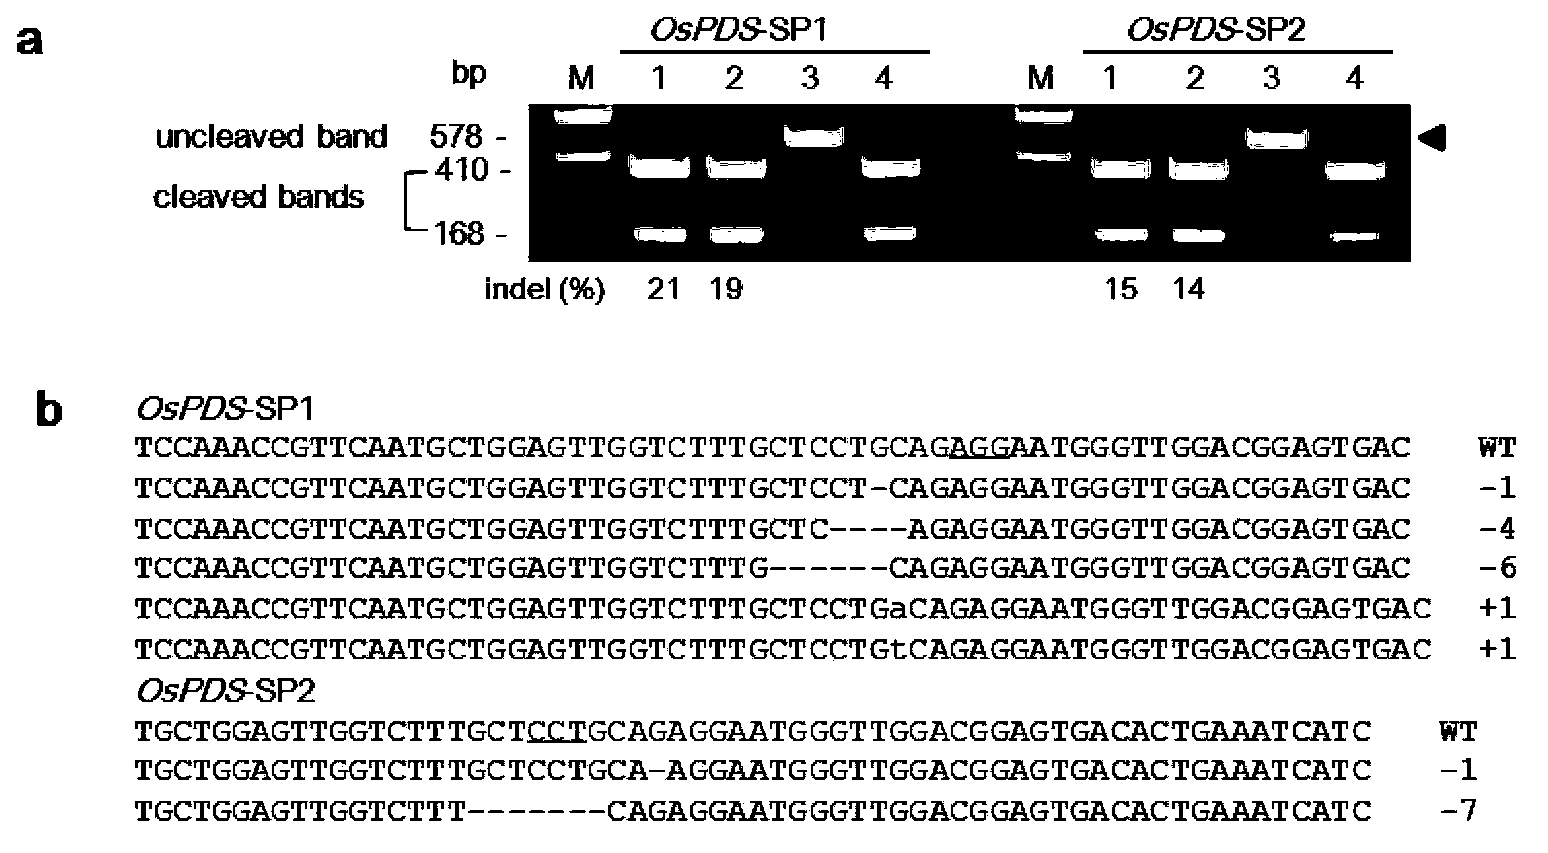 Site-directed modification method of rice genome